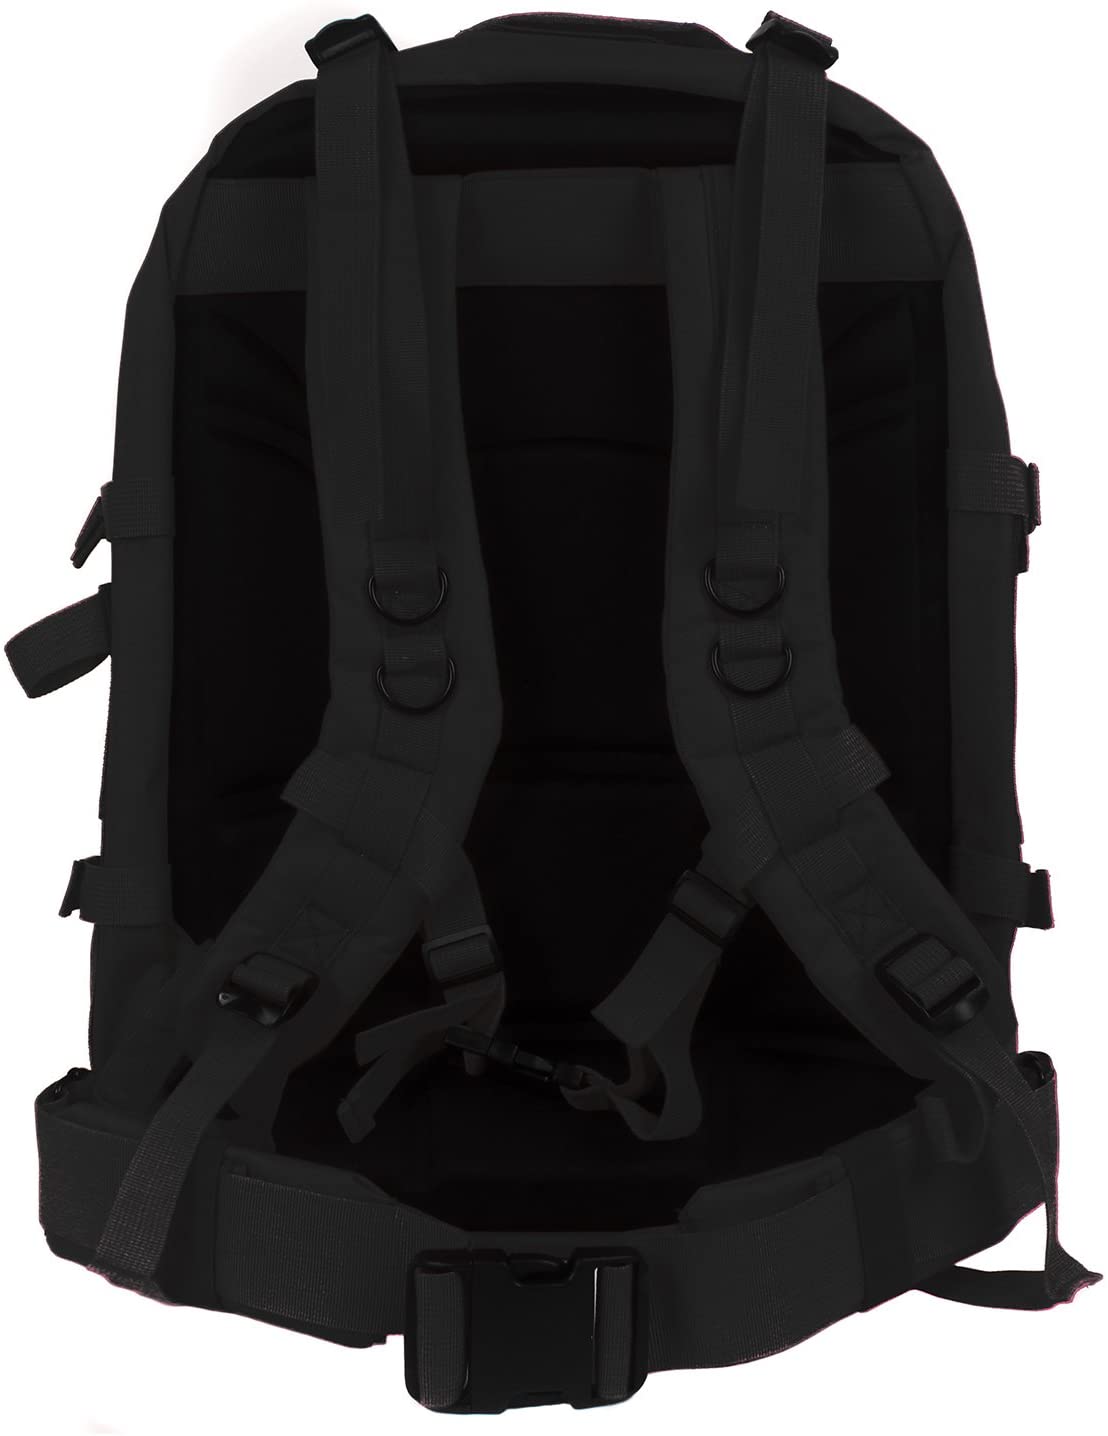 MediTac Deluxe Special Ops Tactical Field Medical Stomp Pack